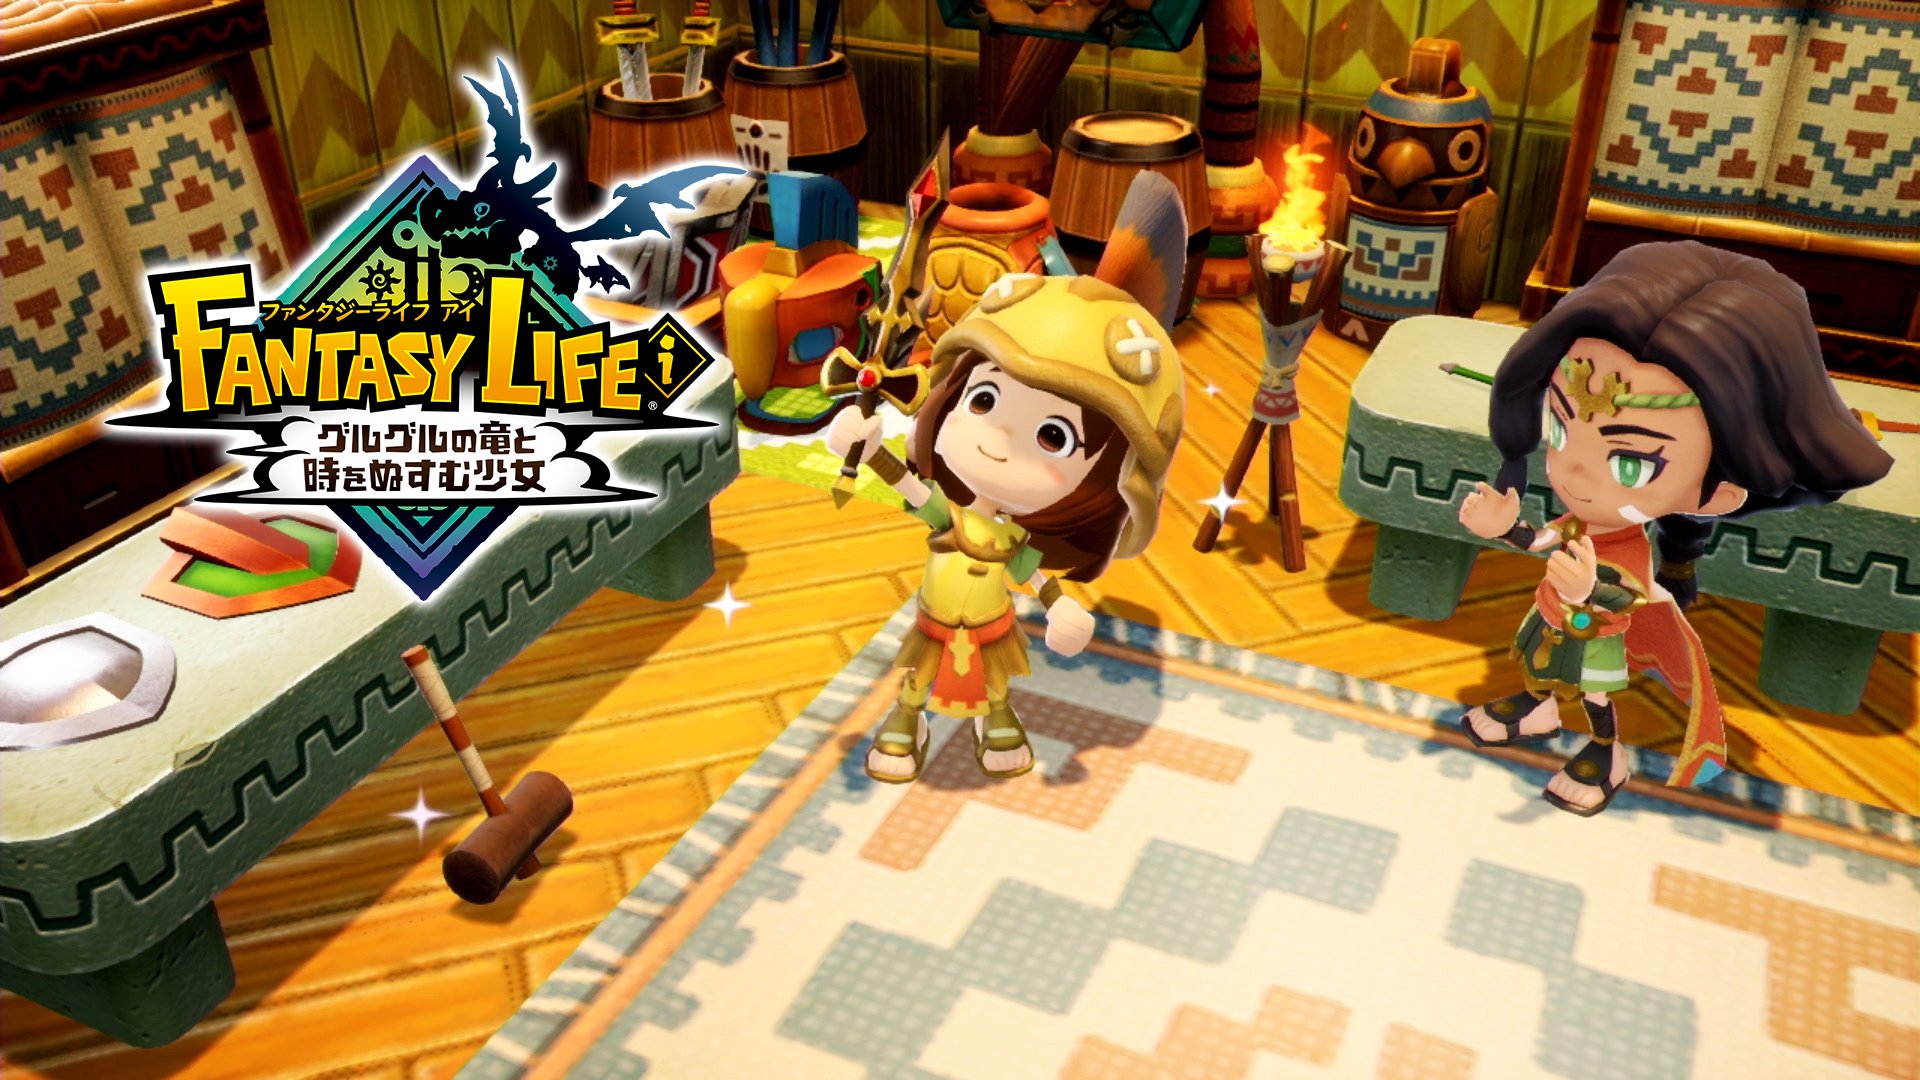 Level-5's Fantasy Life Online Smartphone Game Delayed to Spring 2018 - News  - Anime News Network